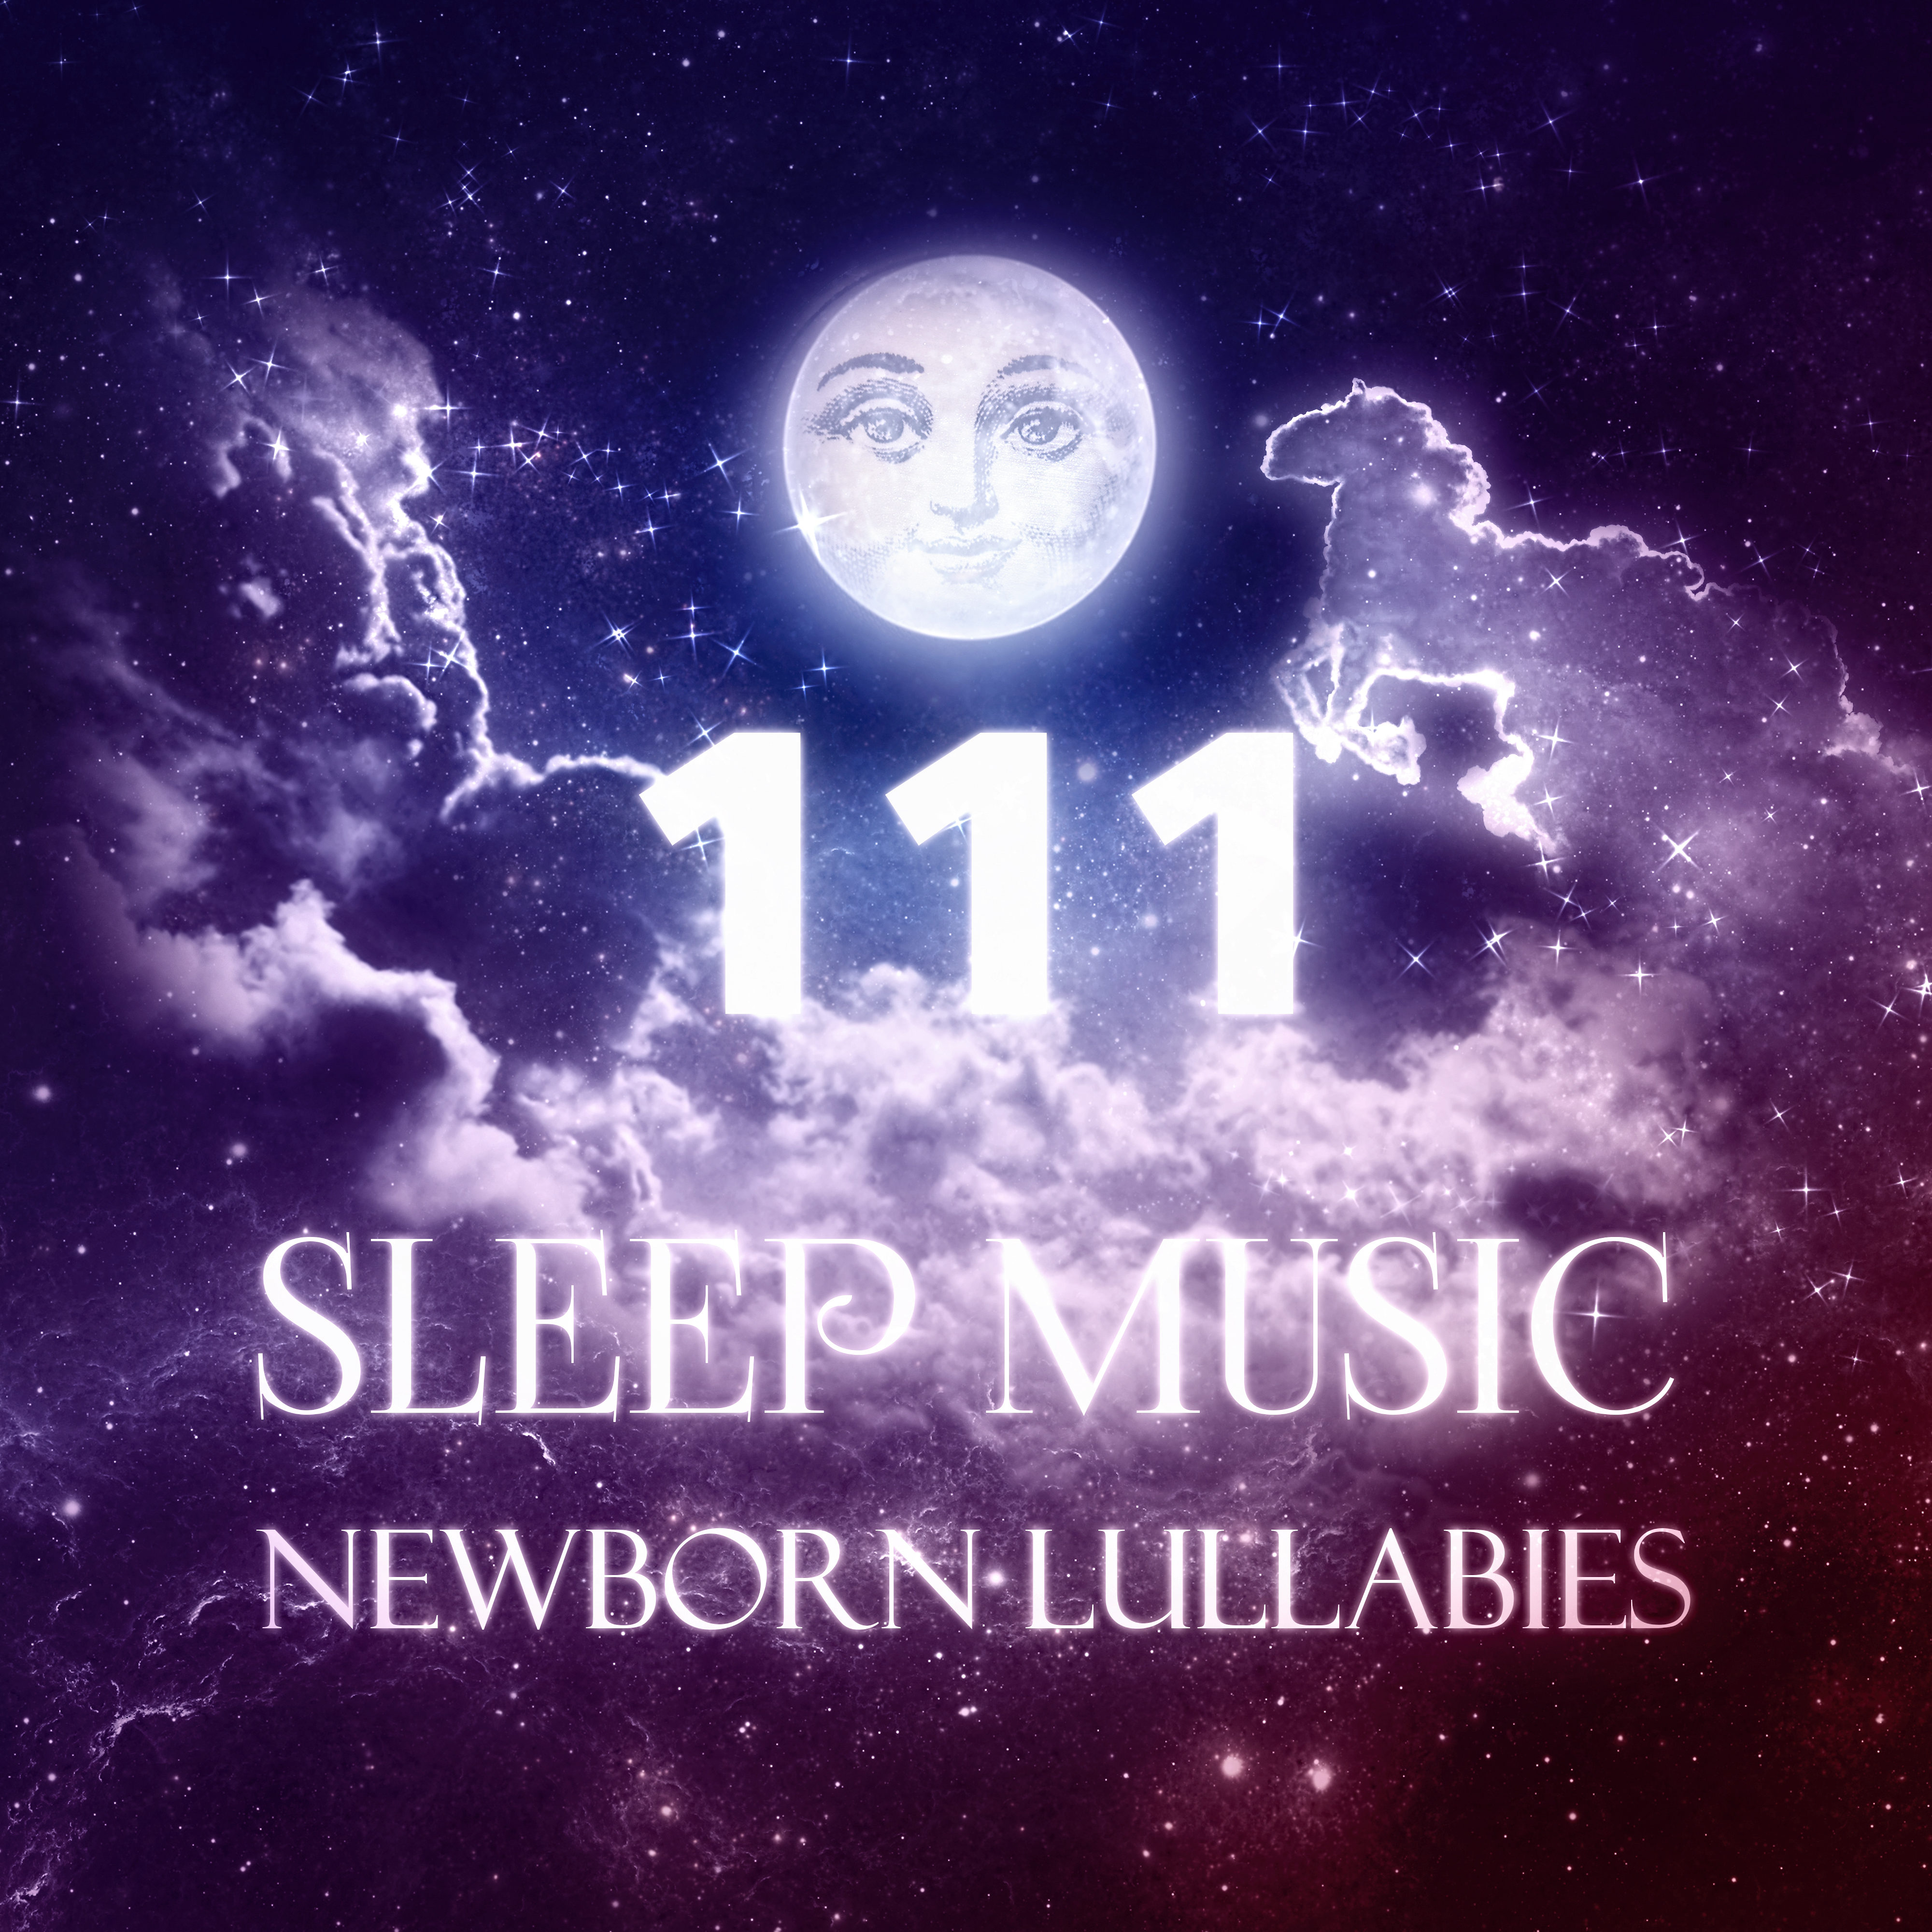 111 Sleep Music: Newborn Lullabies for Goodnight, Relaxation Music to Reduce Stress Level, Natural White Noise for Deep Sleep, Peaceful Piano Songs & Meditation